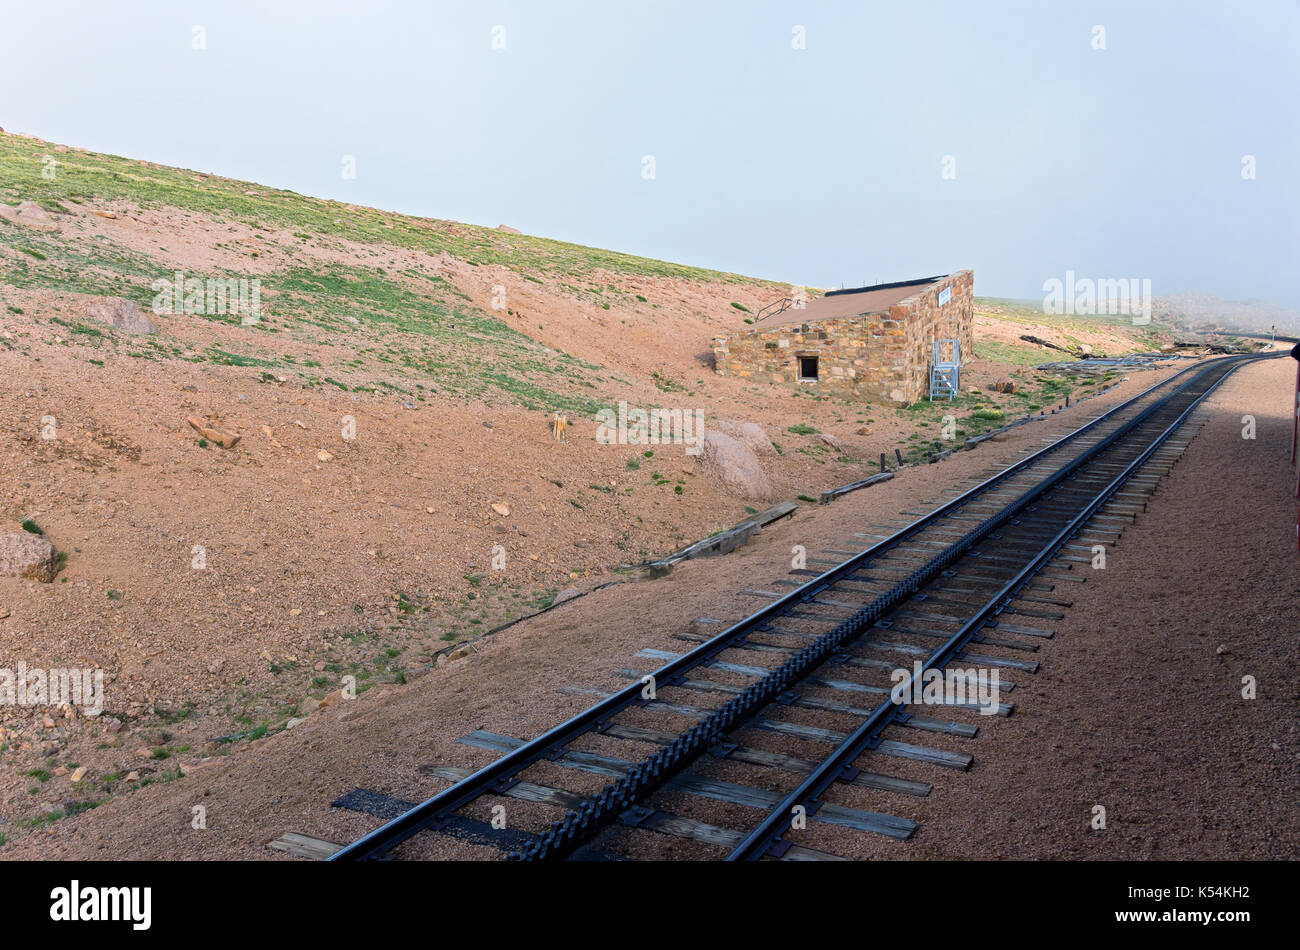 old stone station house building now abandoned along historic cog railway near summit of pikes peak colorado usa Stock Photo